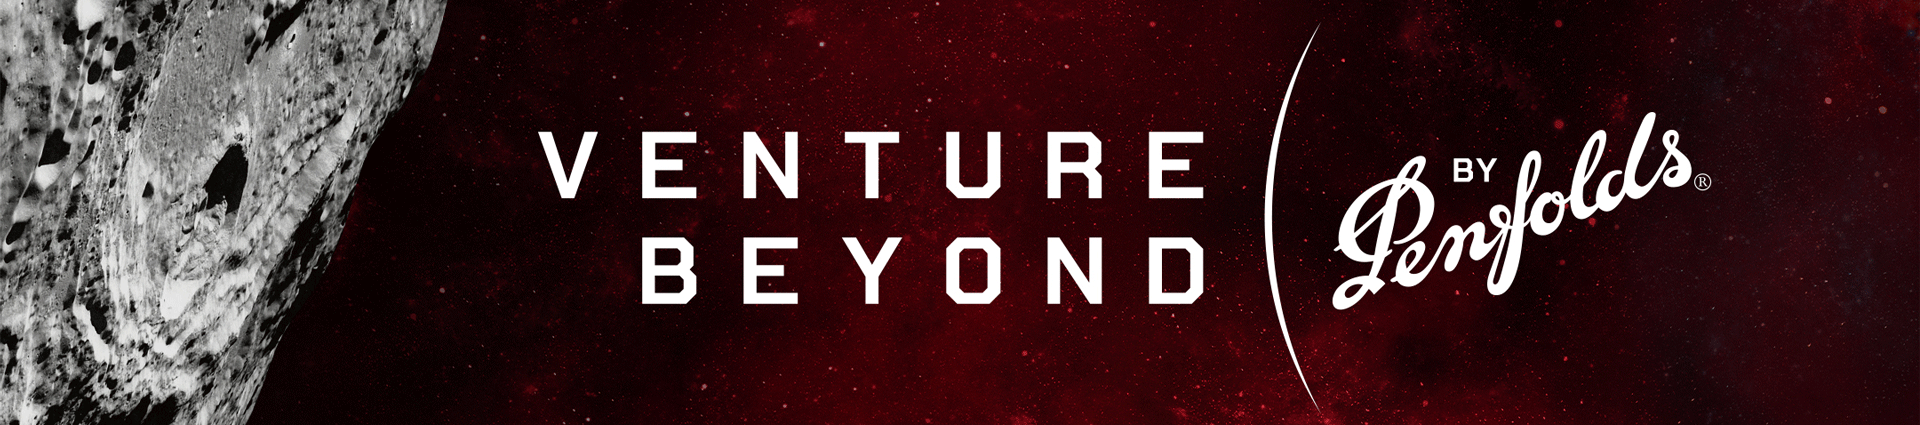 Text: Venture Beyond by Penfolds